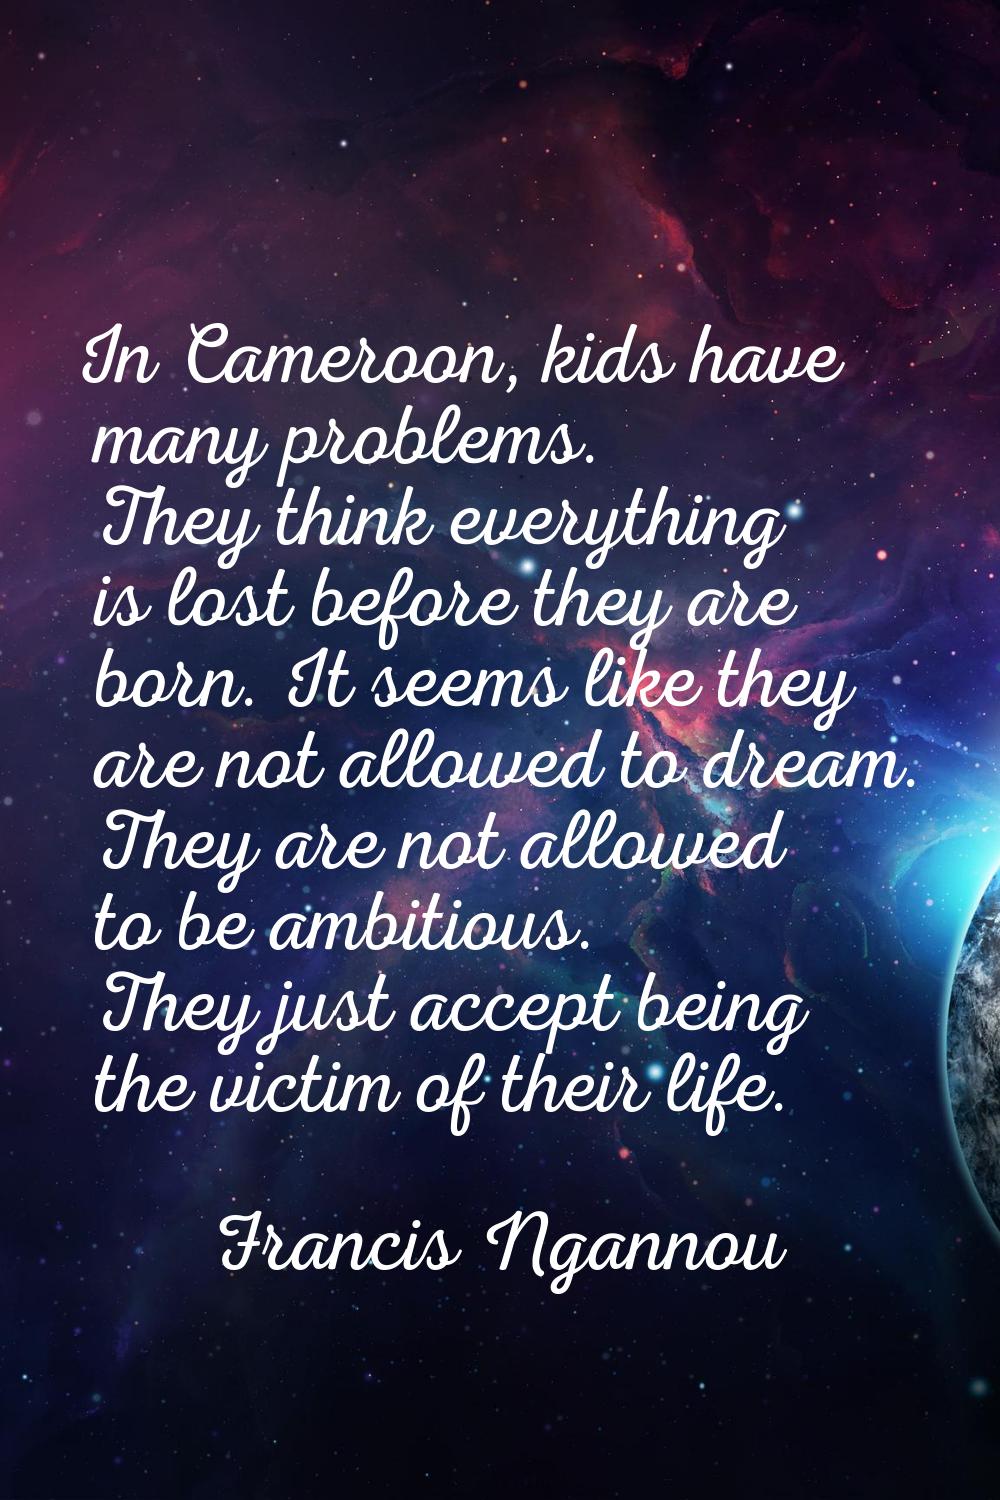 In Cameroon, kids have many problems. They think everything is lost before they are born. It seems 